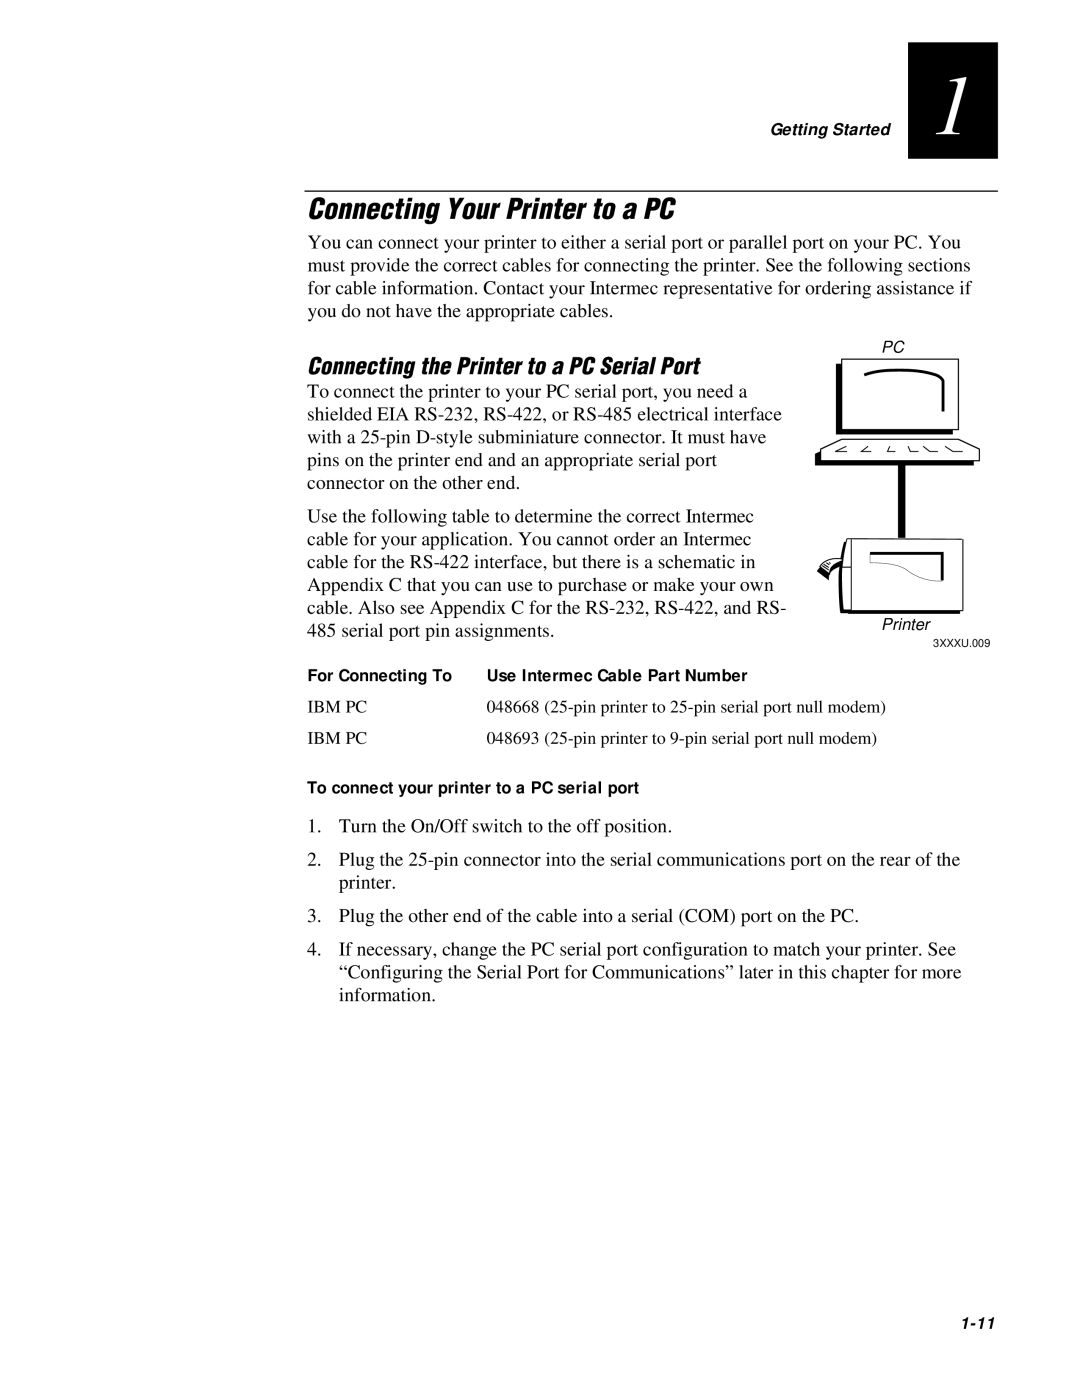 IBM EasyCoder 3400e user manual Connecting Your Printer to a PC, Connecting the Printer to a PC Serial Port, 1-11 